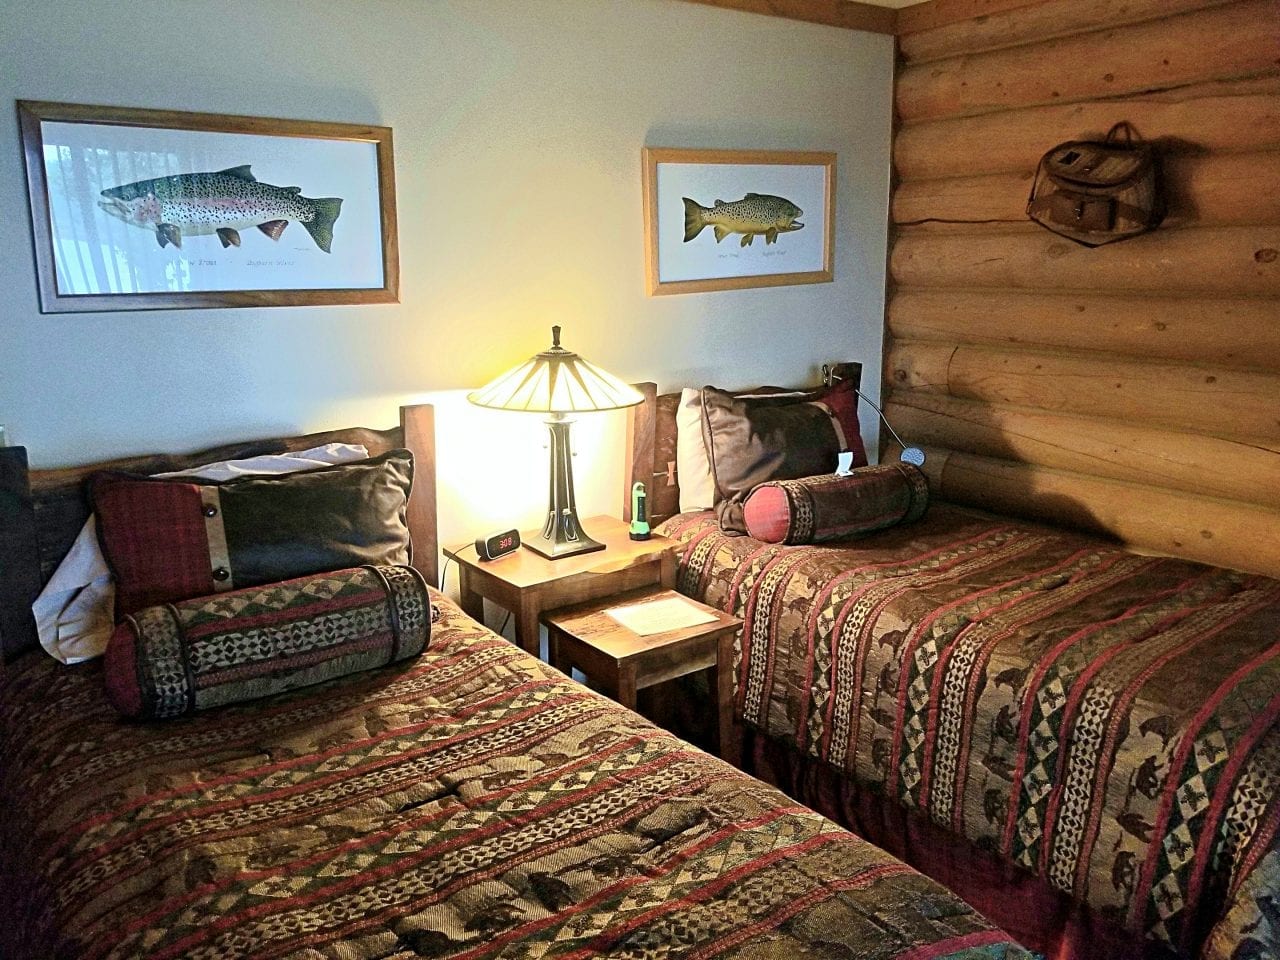 A cozy bedroom at the Bighorn River Lodge